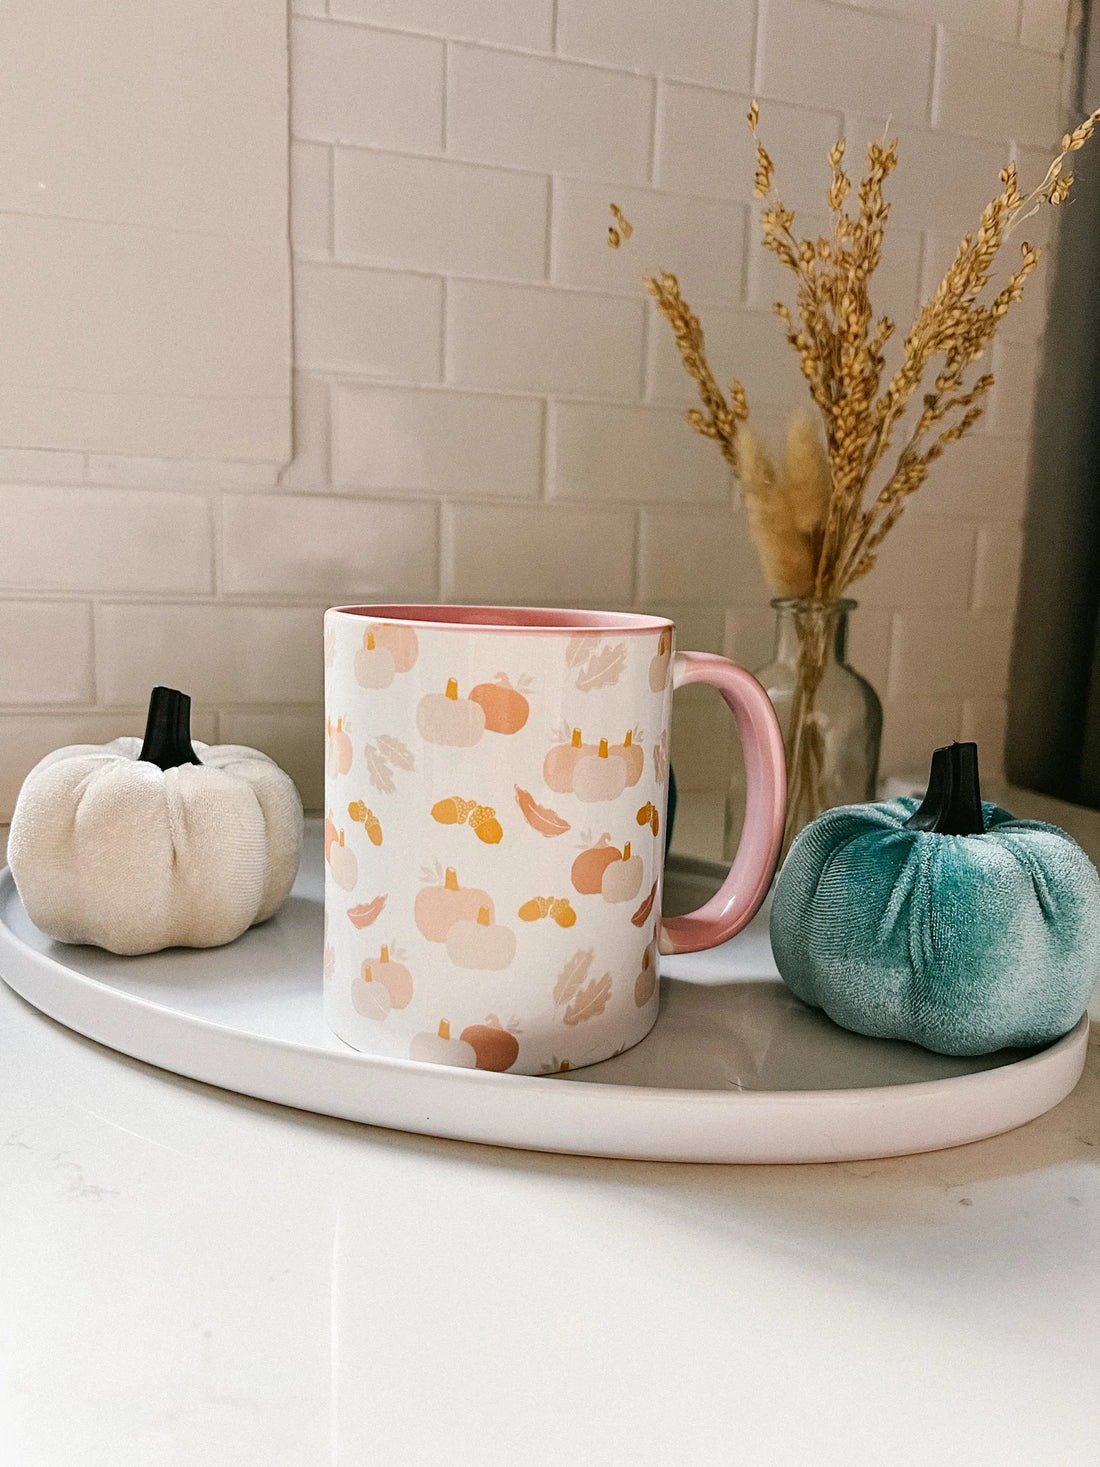 3 Essentials to Make Your Home Cozy this Fall